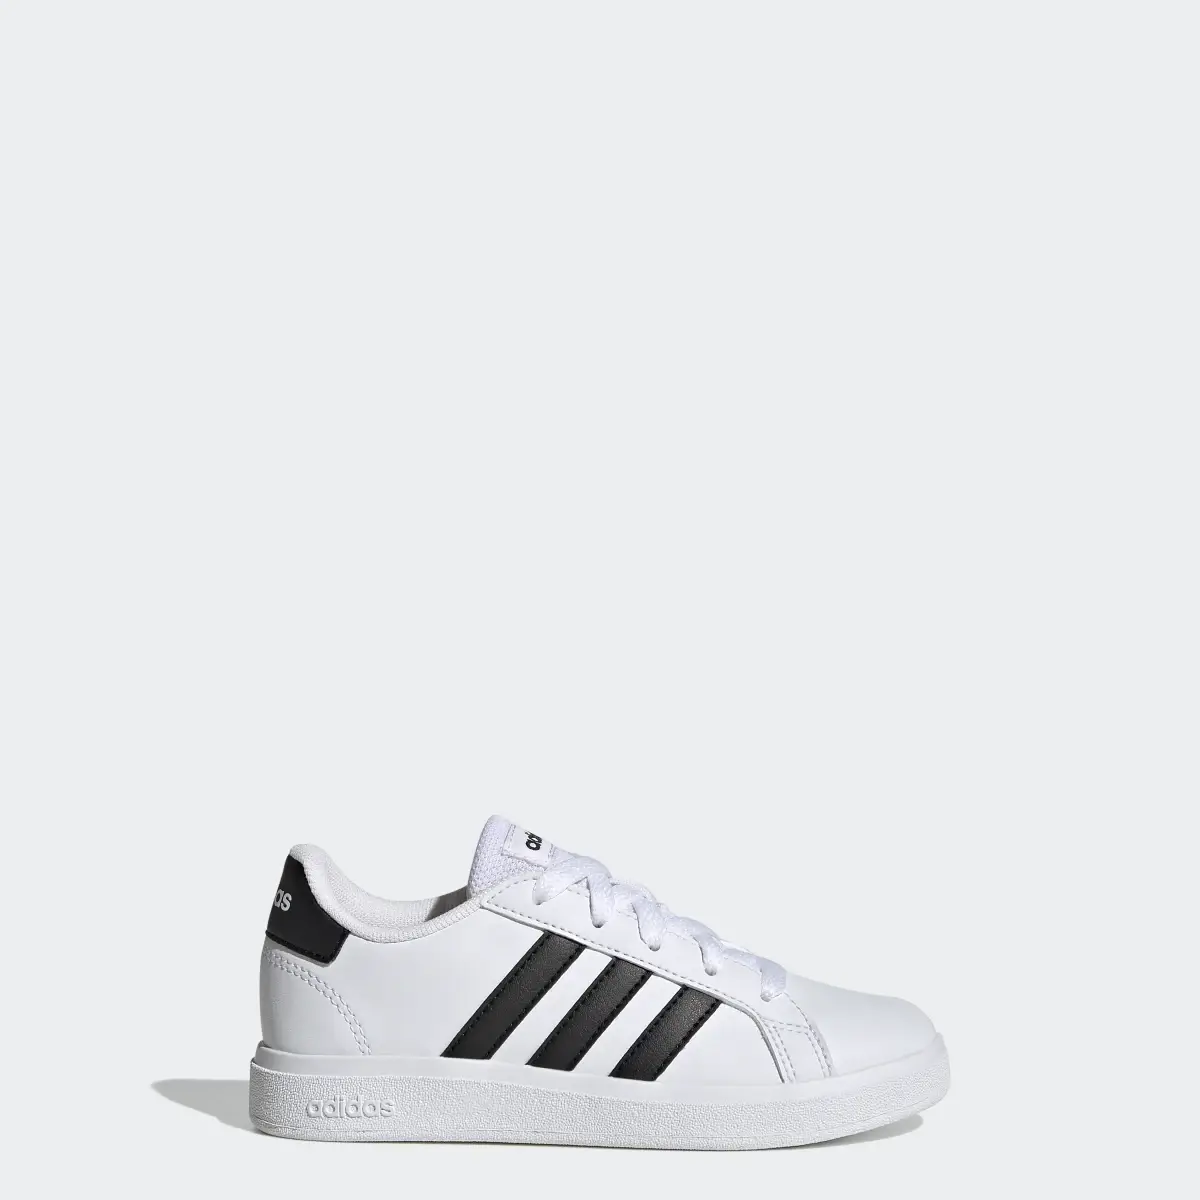 Adidas Grand Court 2.0 Shoes. 1